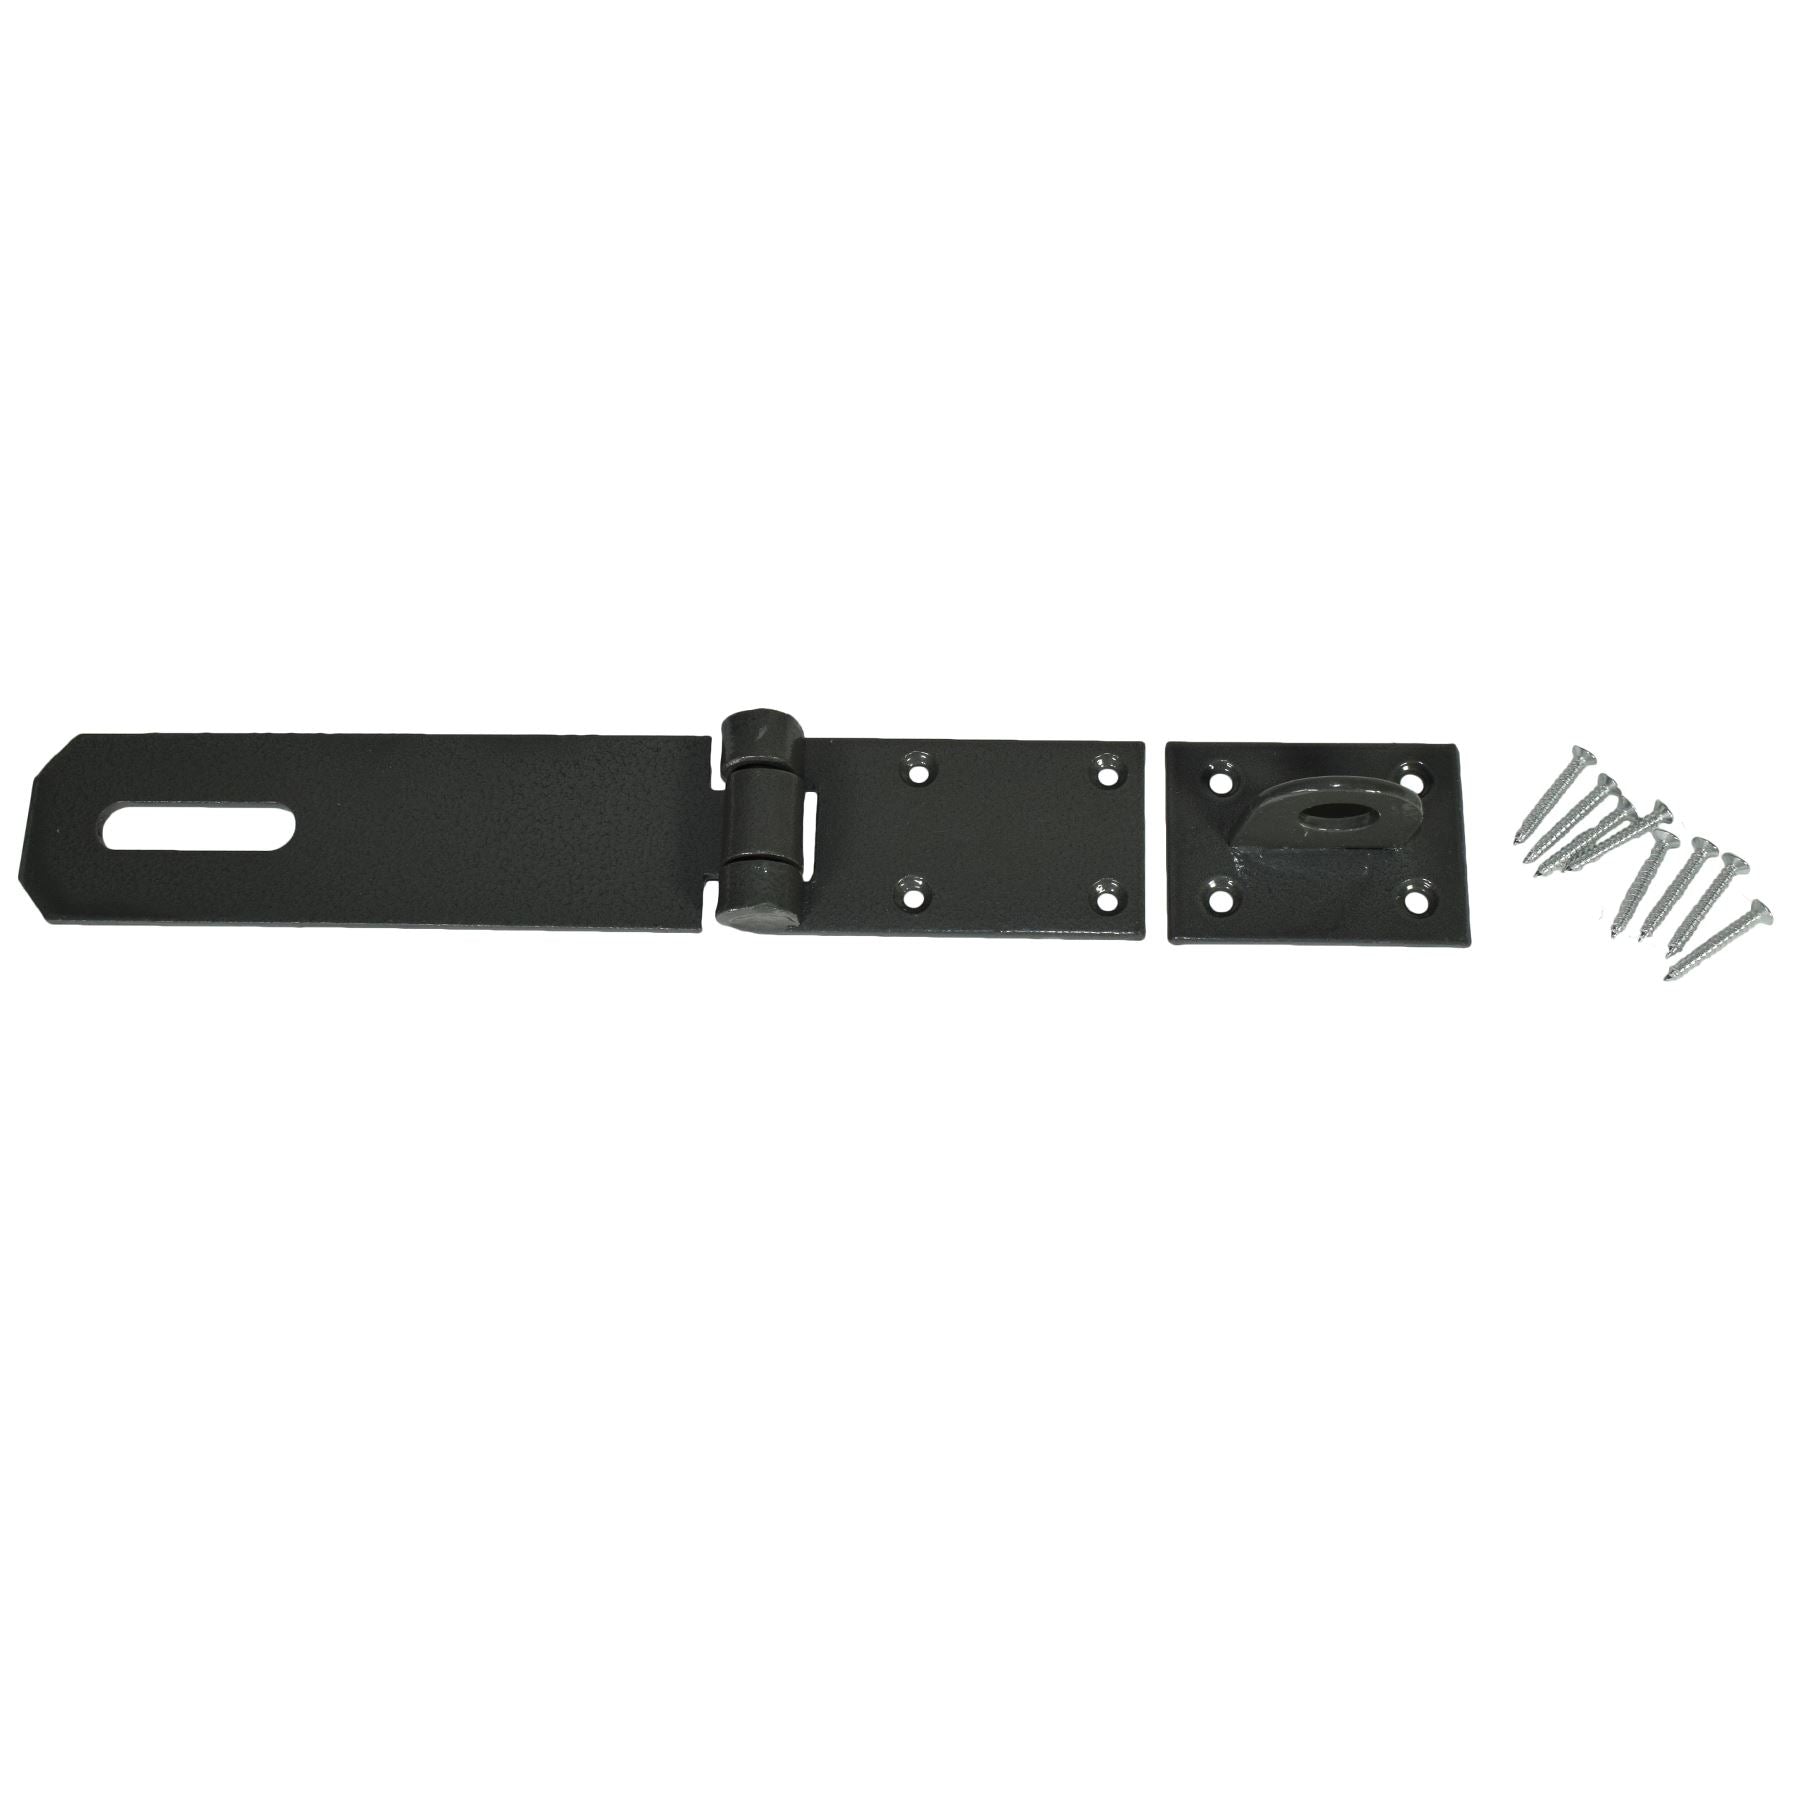 Heavy Duty Cast Iron Hasp And Staple Security Garage Shed Attachment 7" x 2"